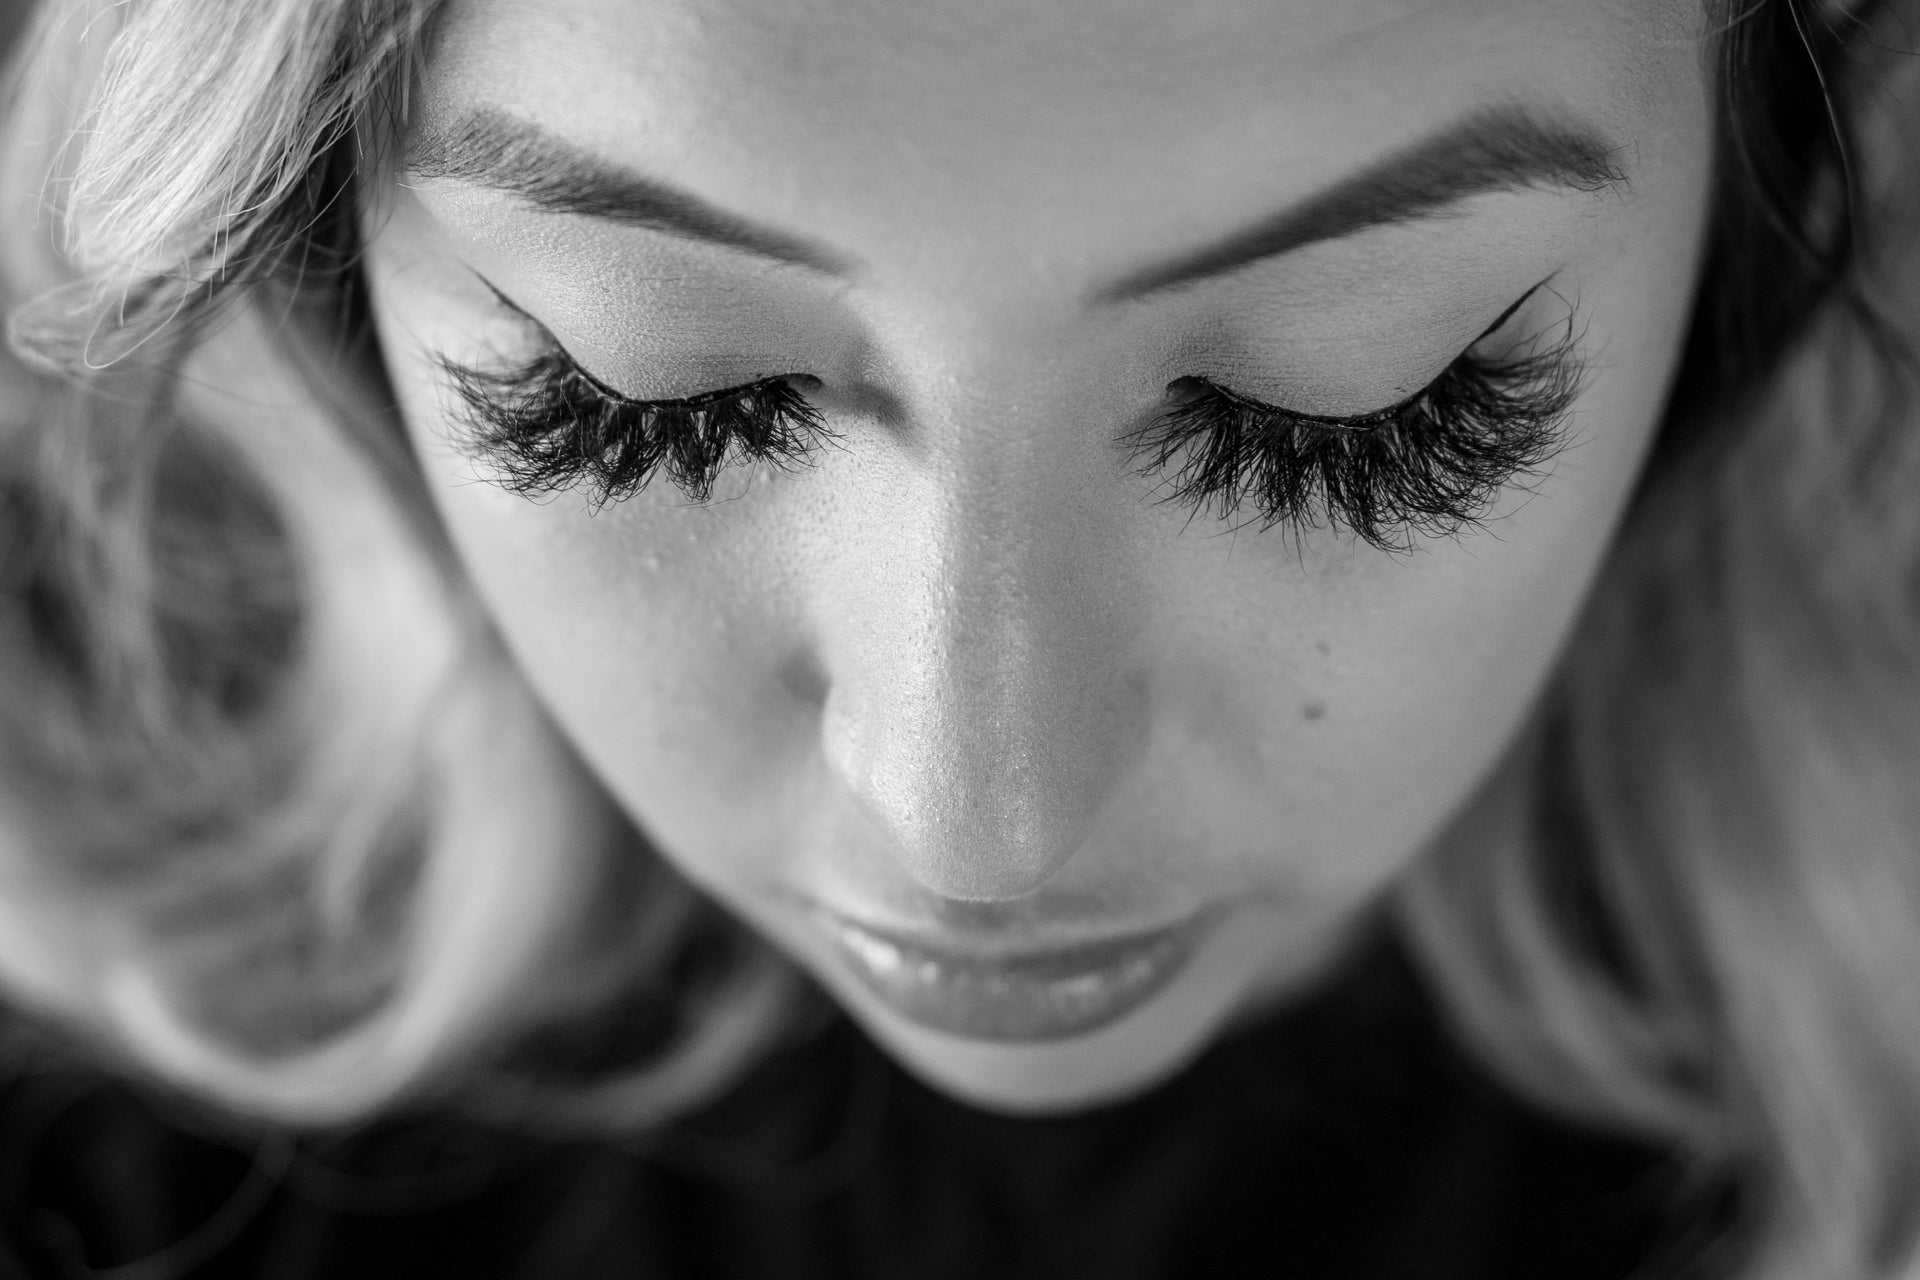 Load video: Classy lashes that give your eyes that over the top look!